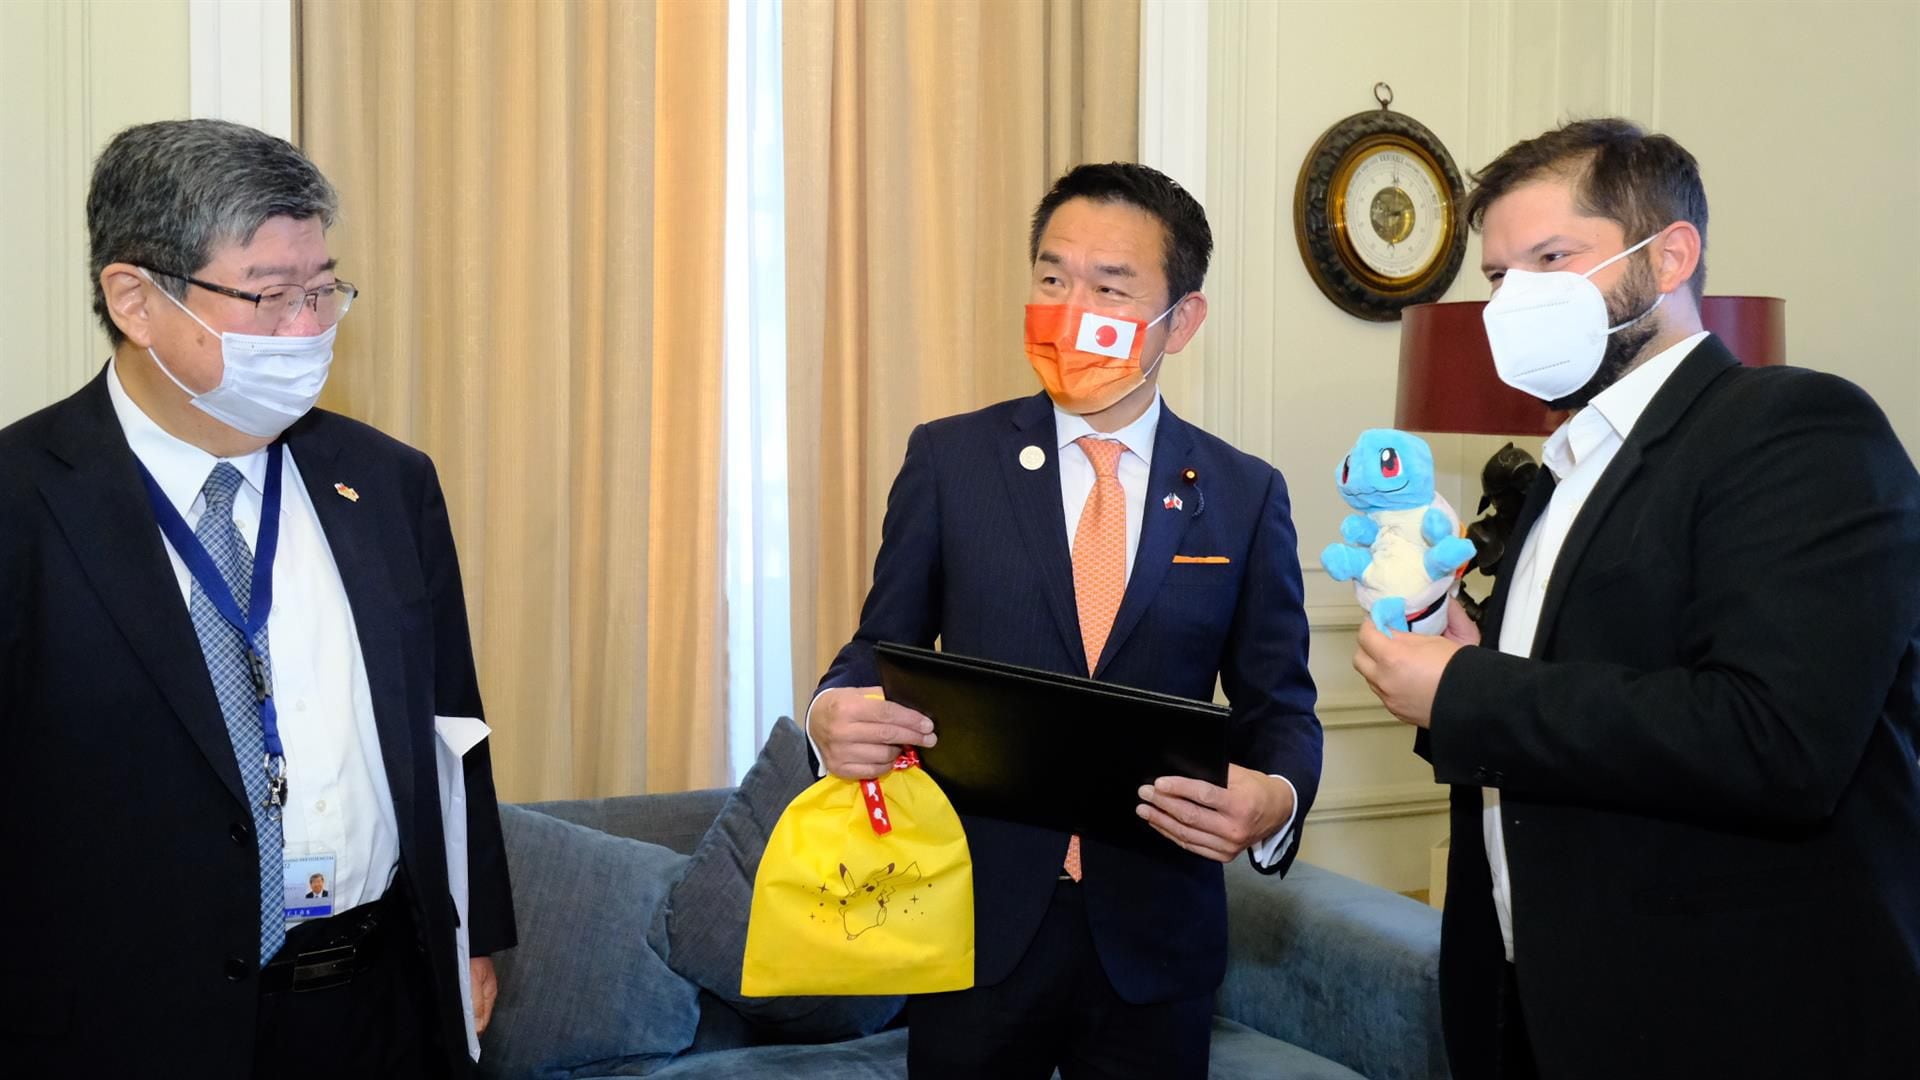 Gabriel Boric greets the Minister of Foreign Affairs of Japan, Kiyoshi Odawara, who gave him a pokeball and a stuffed toy of Squirtle, one of the characters from the Pokémon animated series.  (EFE).